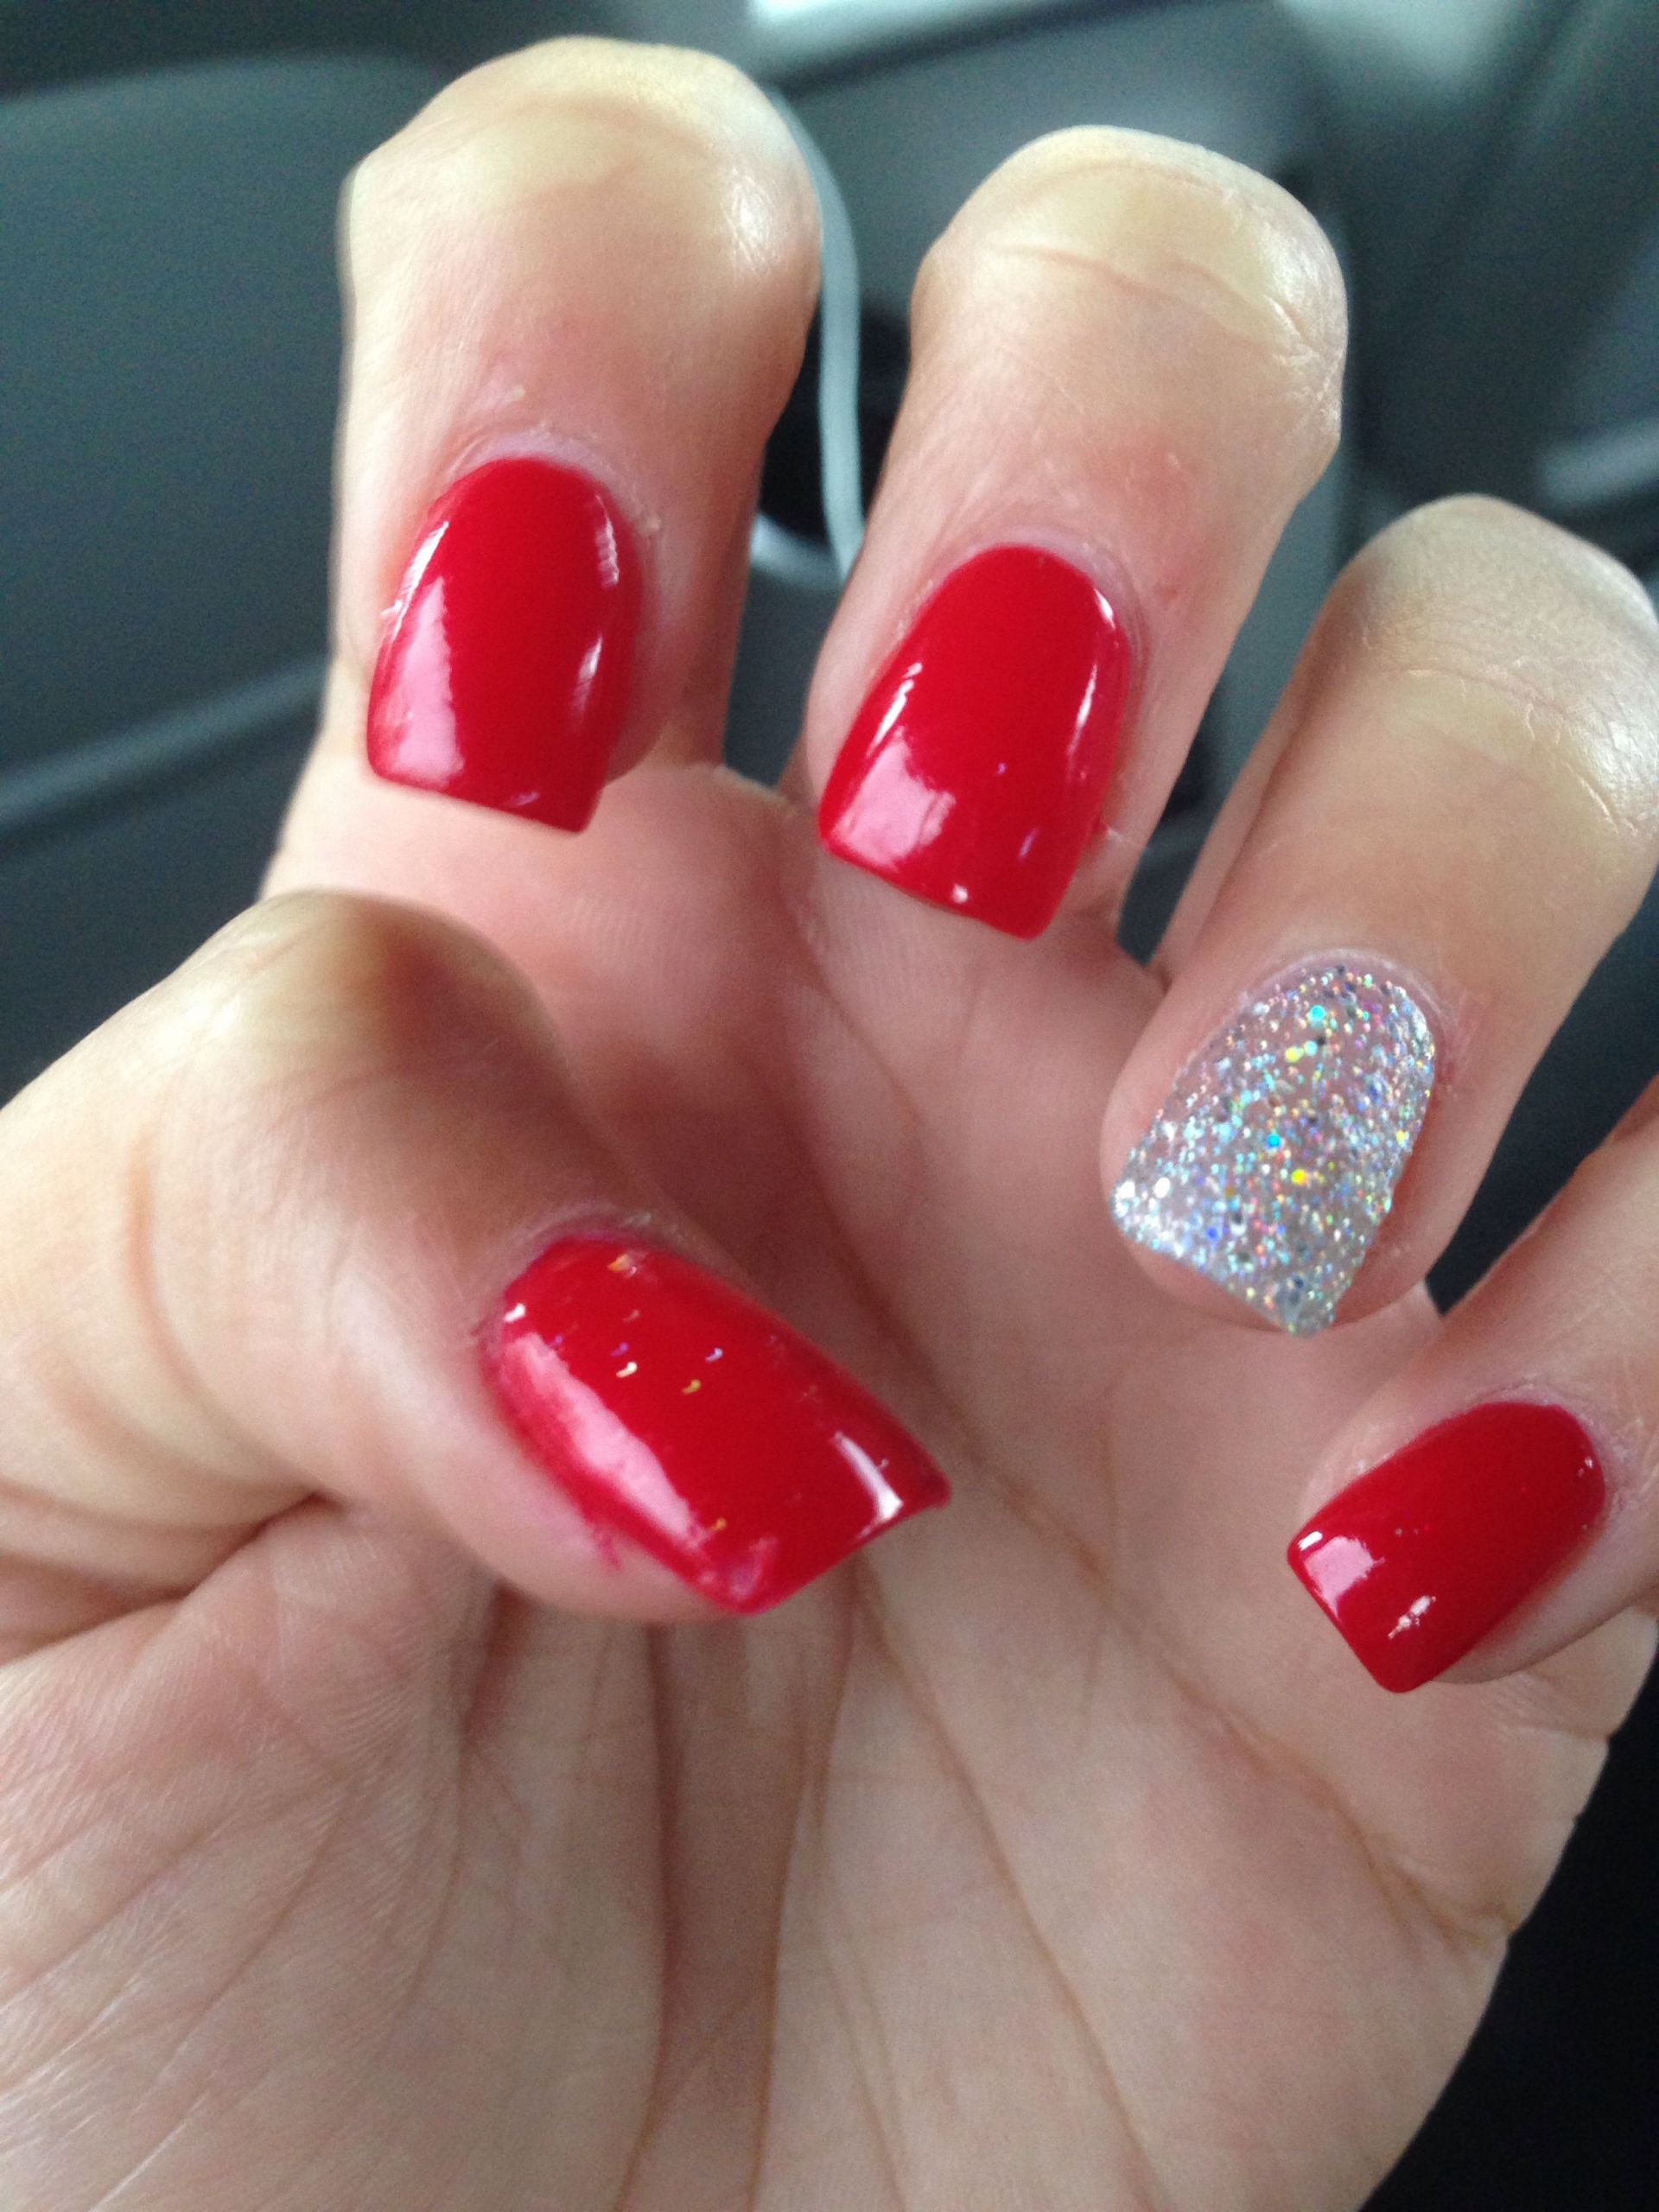 Red Glitter Nails
 Acrylics Red with glitter nail on ring finger